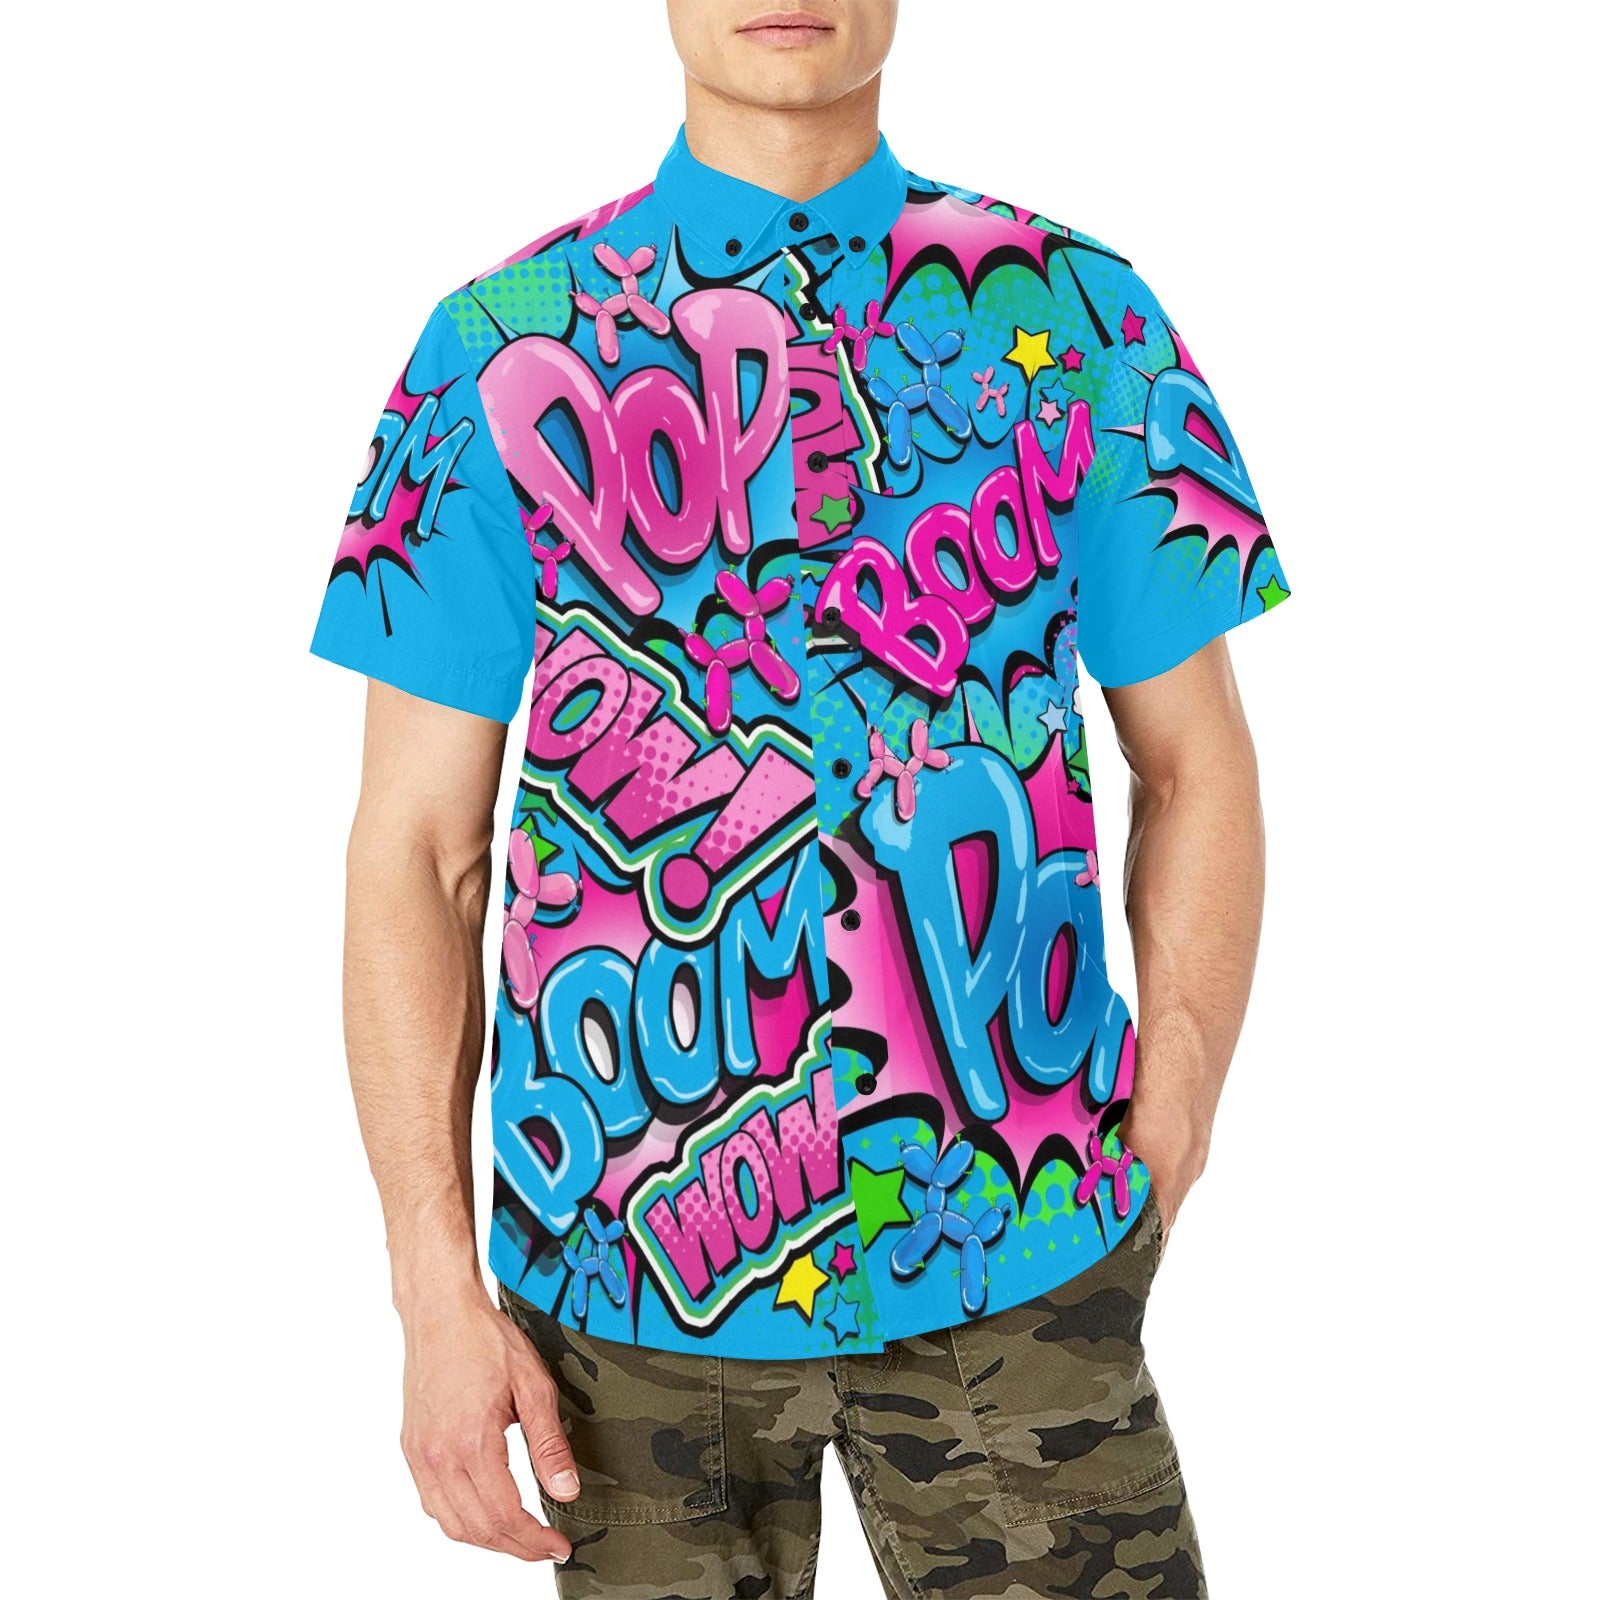 Blue and Pink Balloon dog shirt with chest pocket for professional balloon twisters